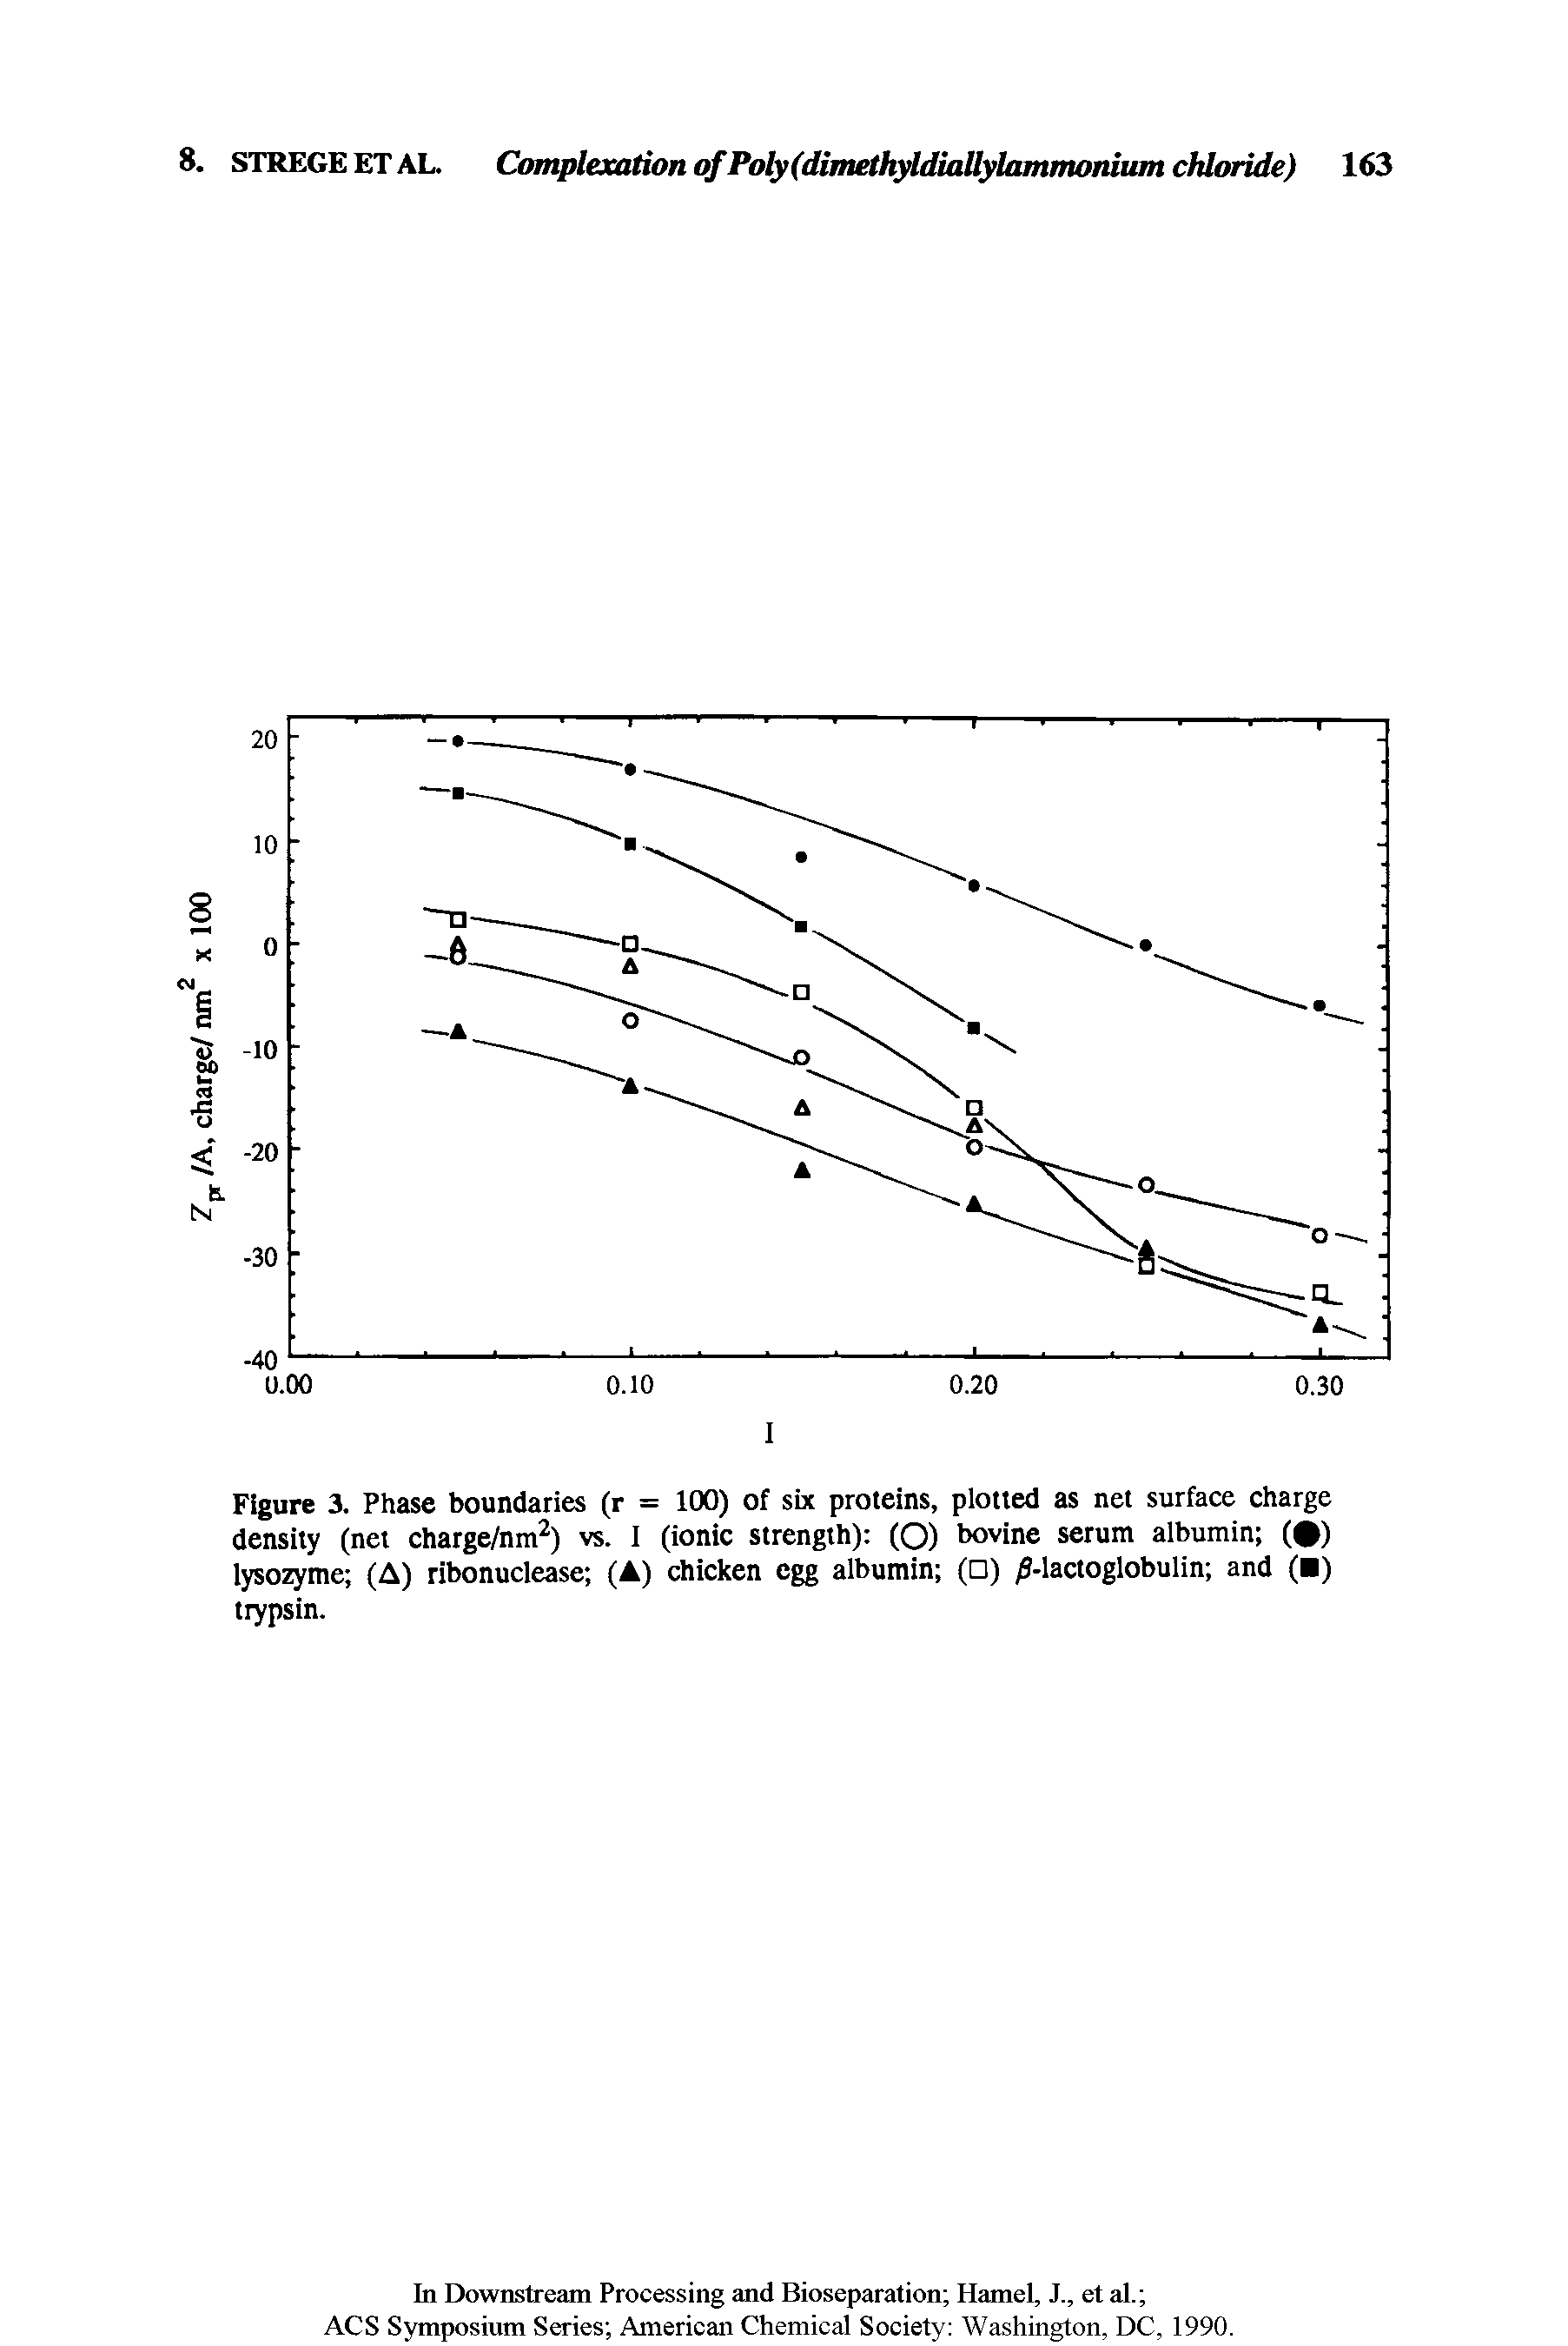 Figure 3. Phase boundaries (r = 100) of six proteins, plotted as net surface charge density (net charge/nm ) vs. 1 (ionic strength) (O) bovine serum albumin ( ) lysozyme (A) ribonuclease (A) chicken egg albumin ( ) -lactoglobulin and ( ) trypsin.